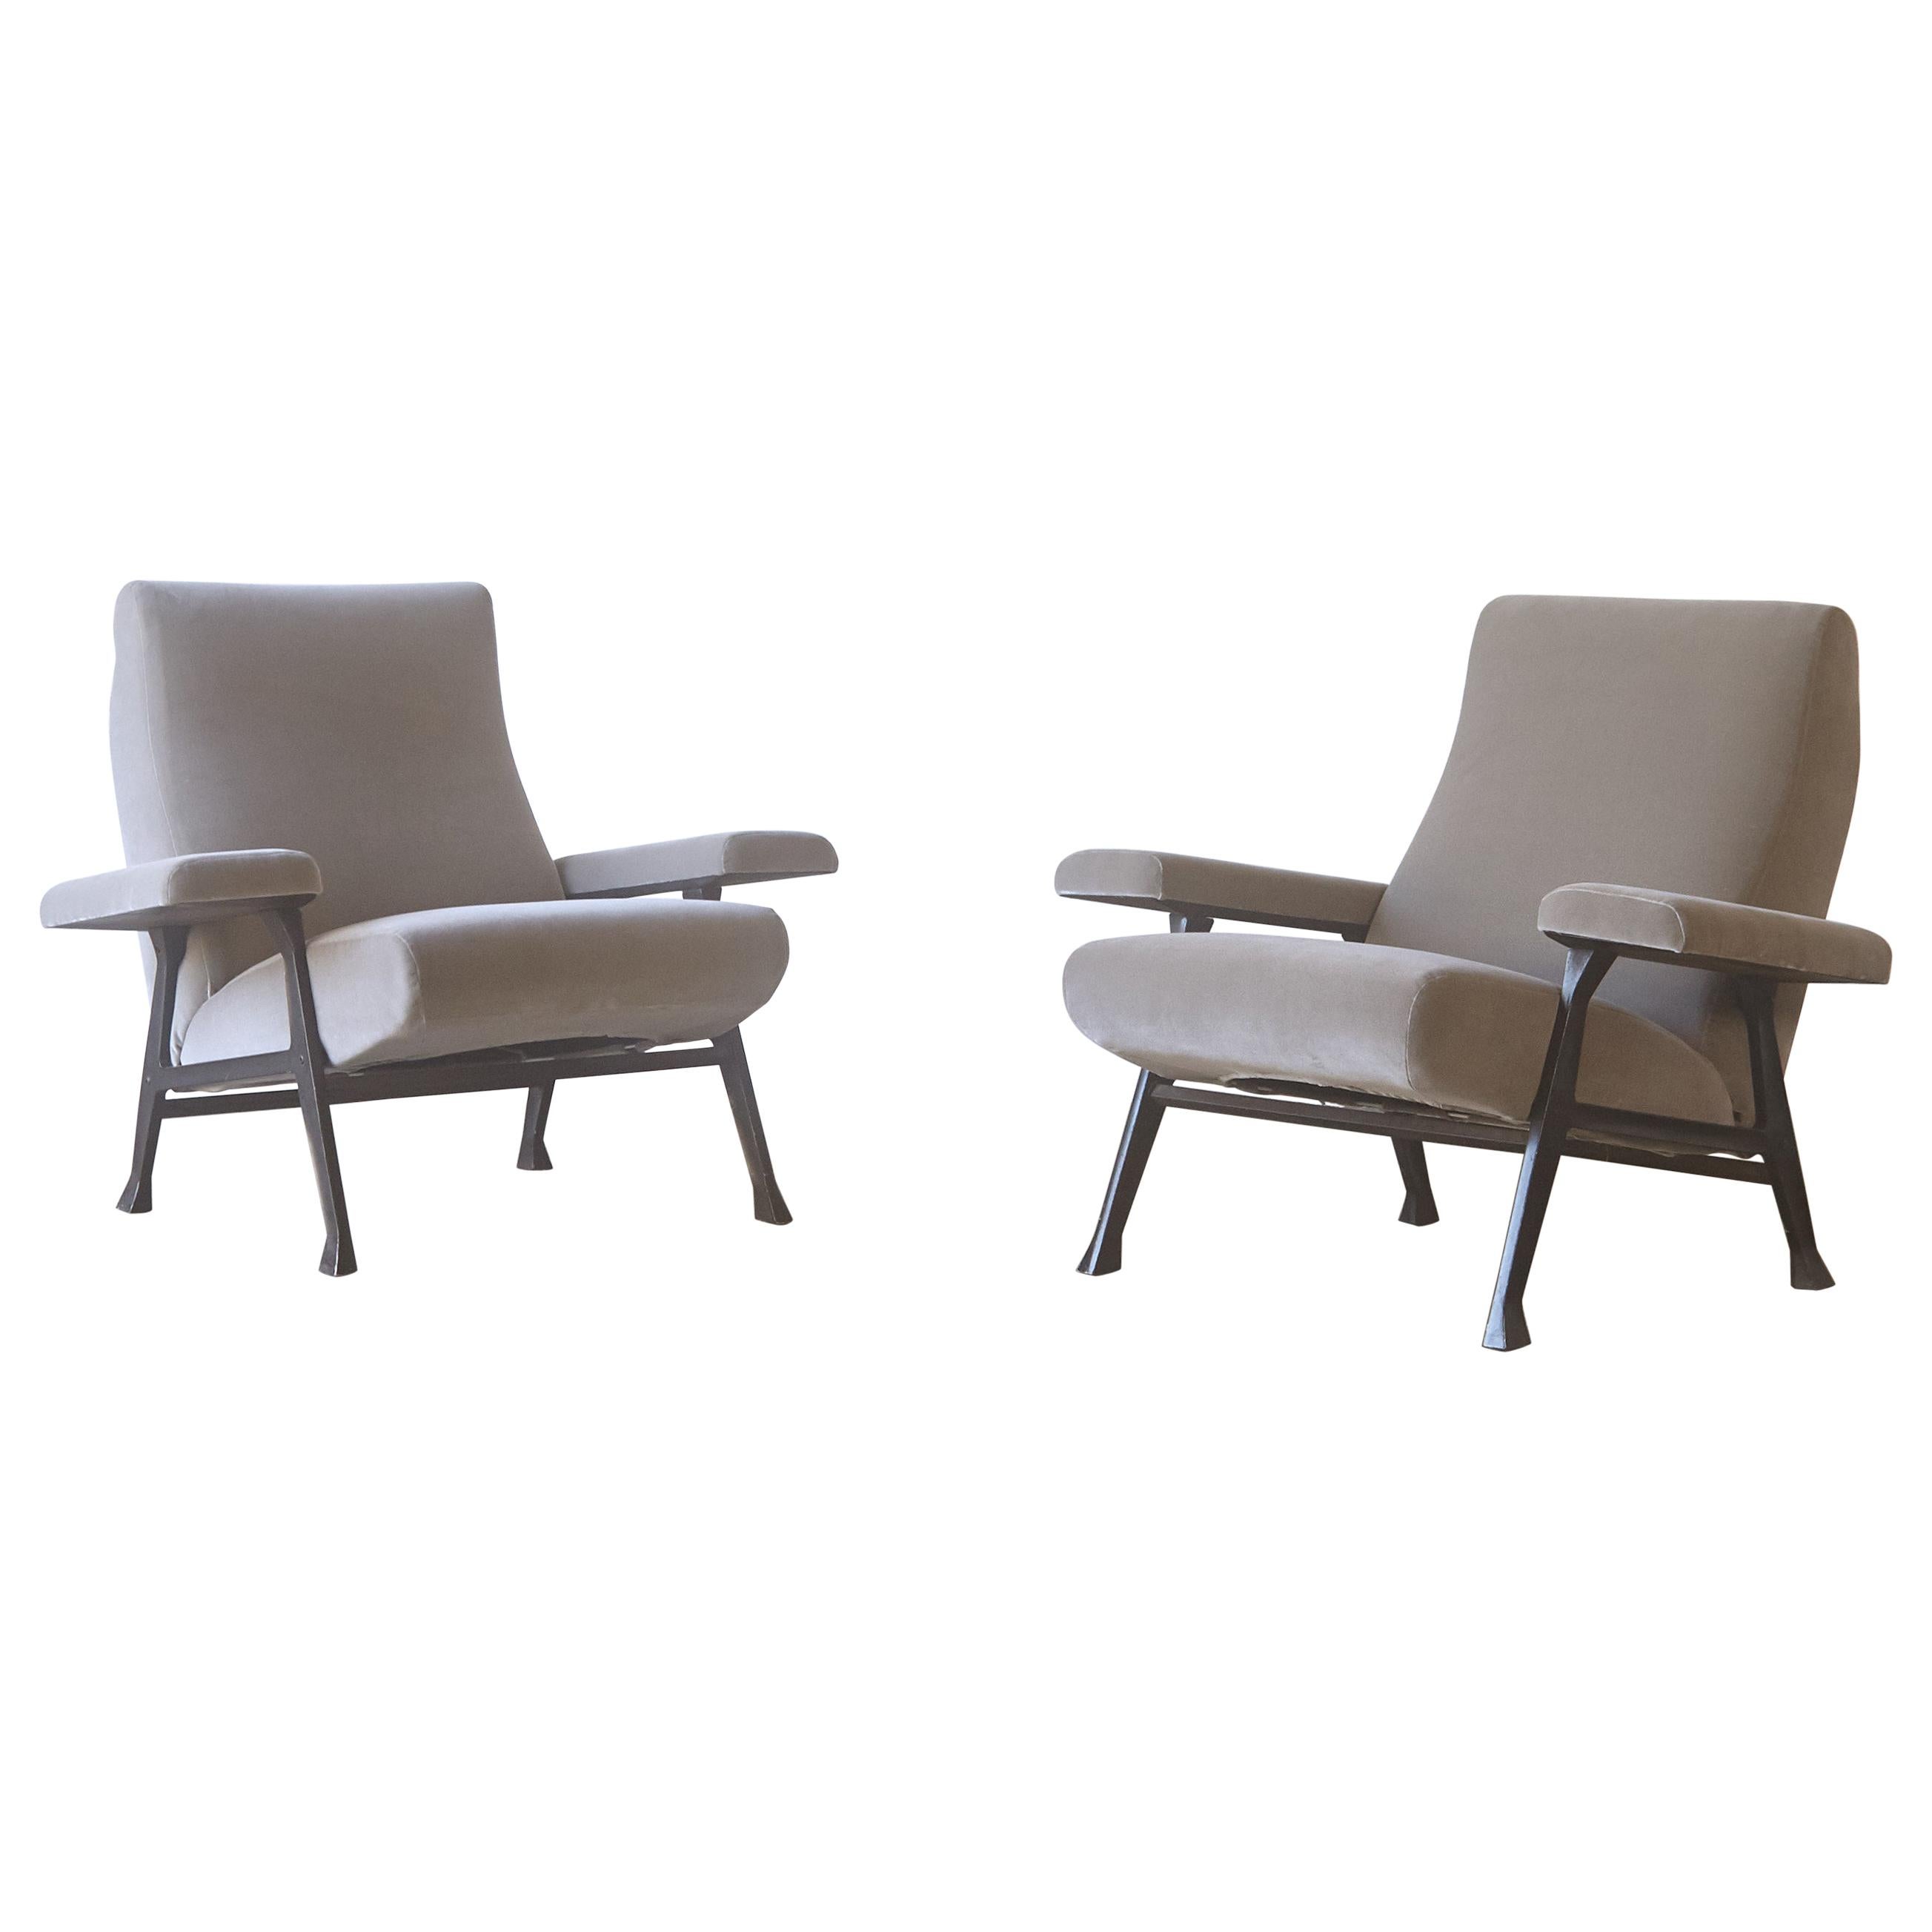 Rare Pair of Authentic 1950s Roberto Menghi Hall Chairs, Arflex, Italy